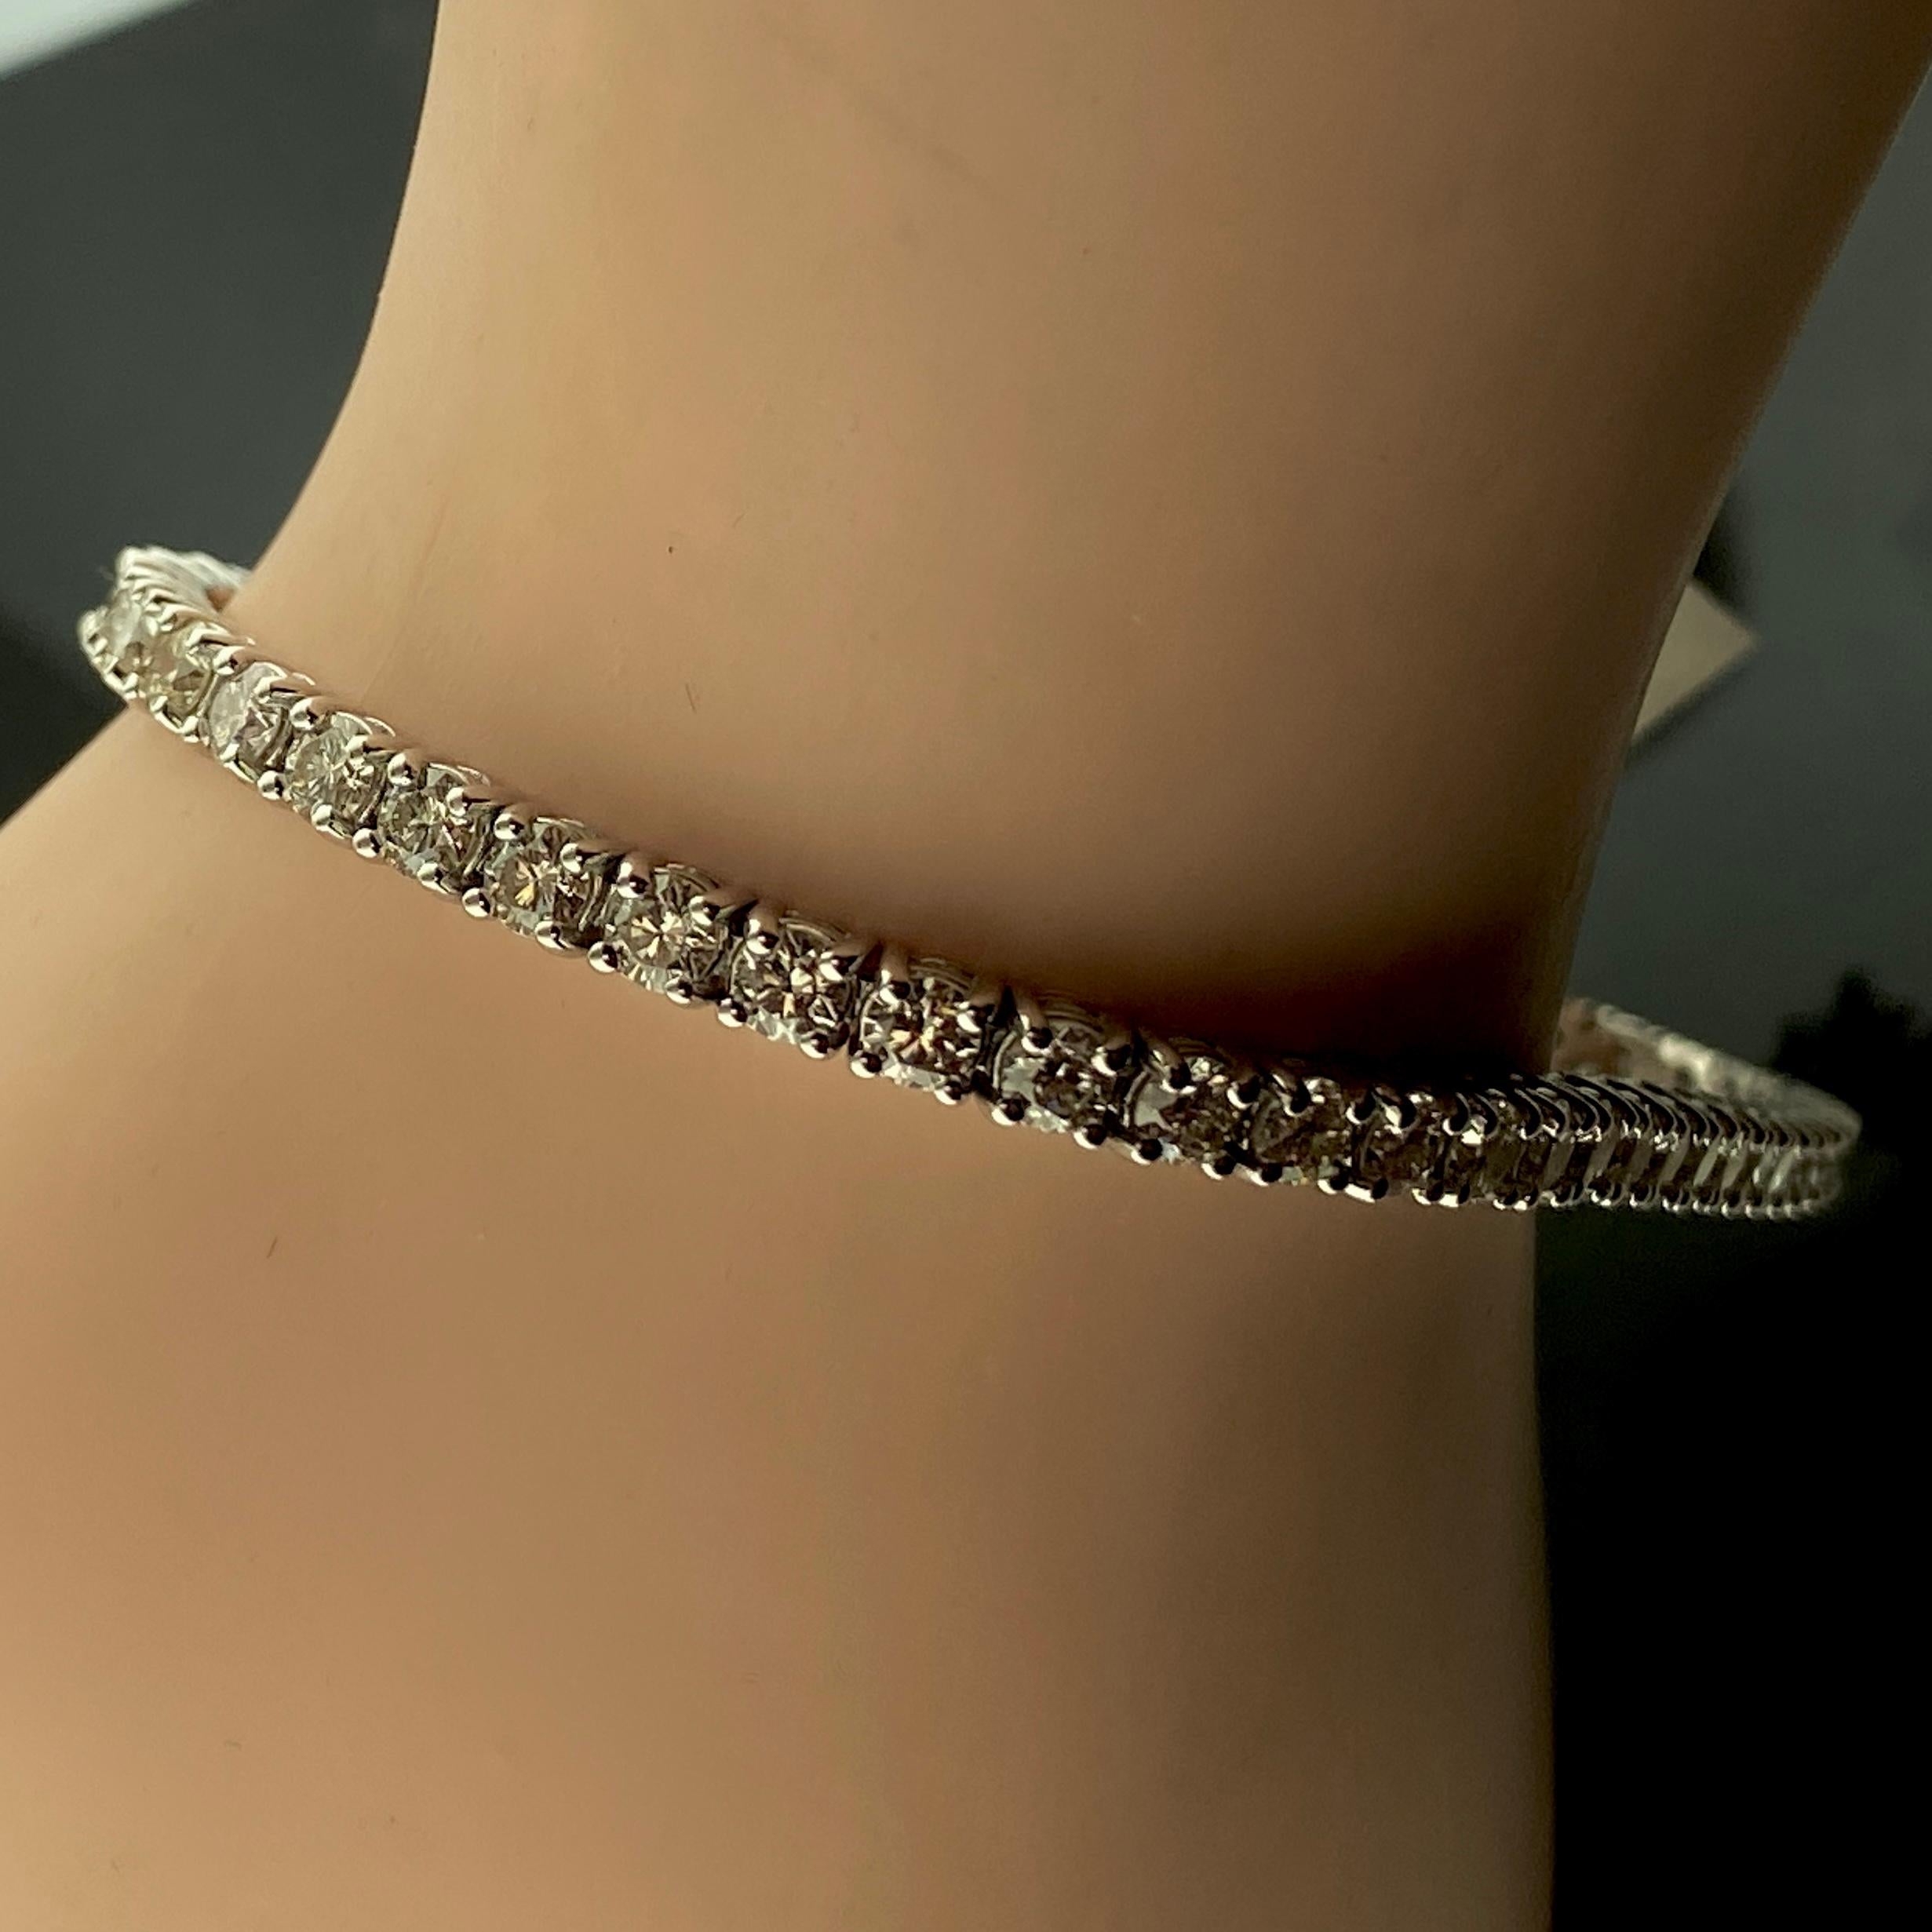 6.00 carat total weight Round Brilliant Cut Diamond Tennis Bracelet in 14 Karat White Gold.

The bracelet weighs approximately 10 grams, 7 inches in length, there are 55 Natural Round Brilliant Cut diamonds, H in color, VS in clarity.